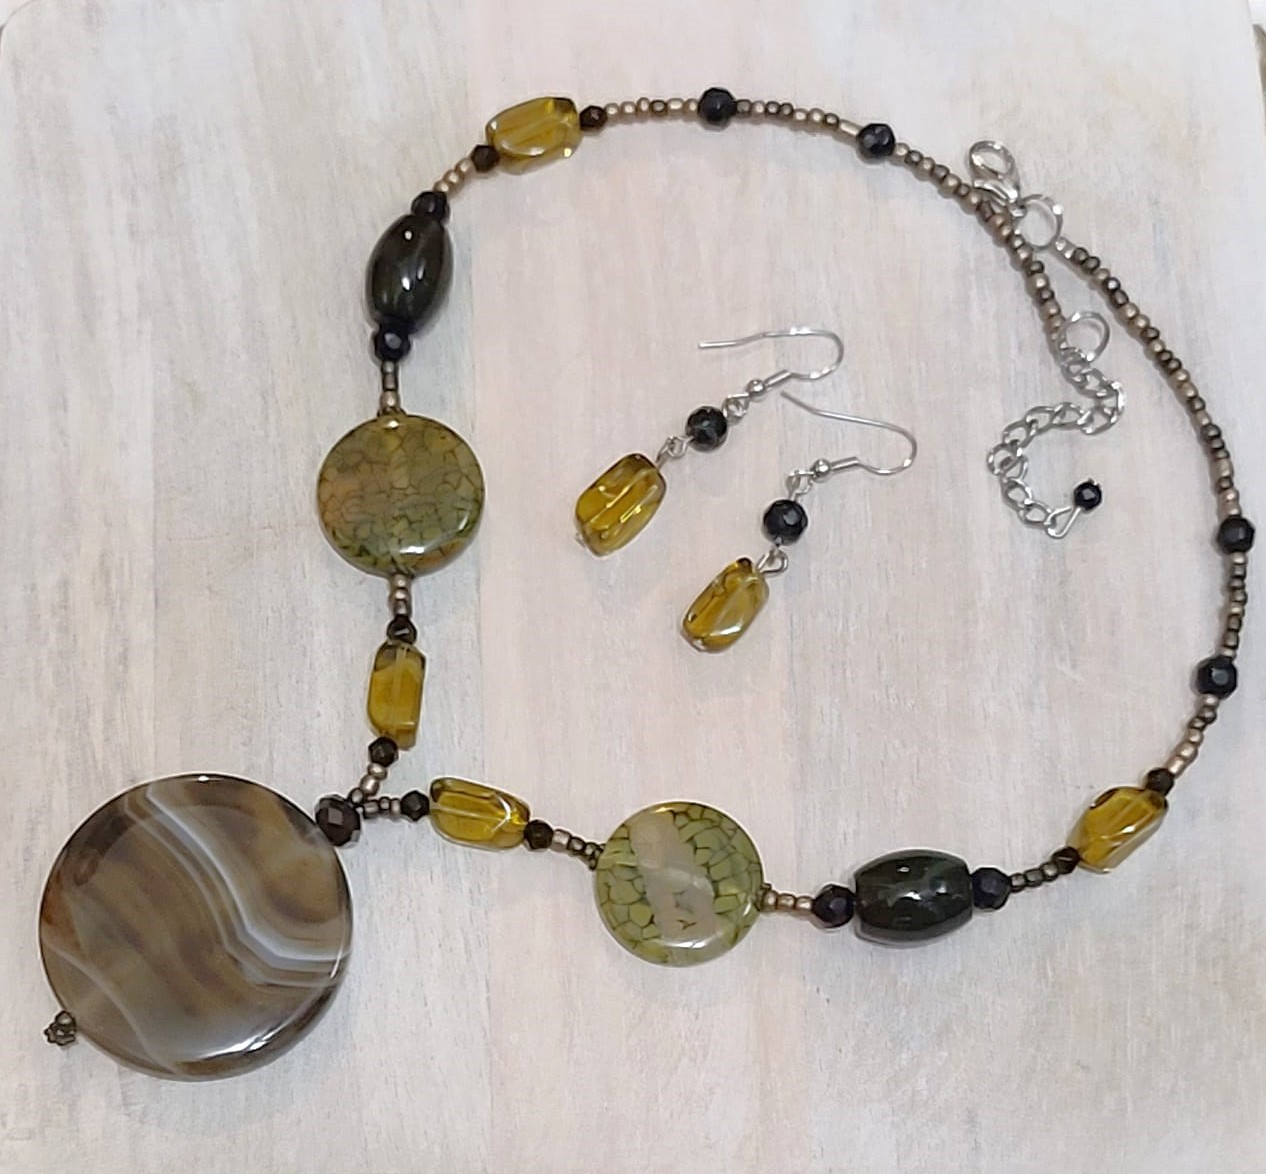 Striped Agate gemstone pendant necklace with earrings set